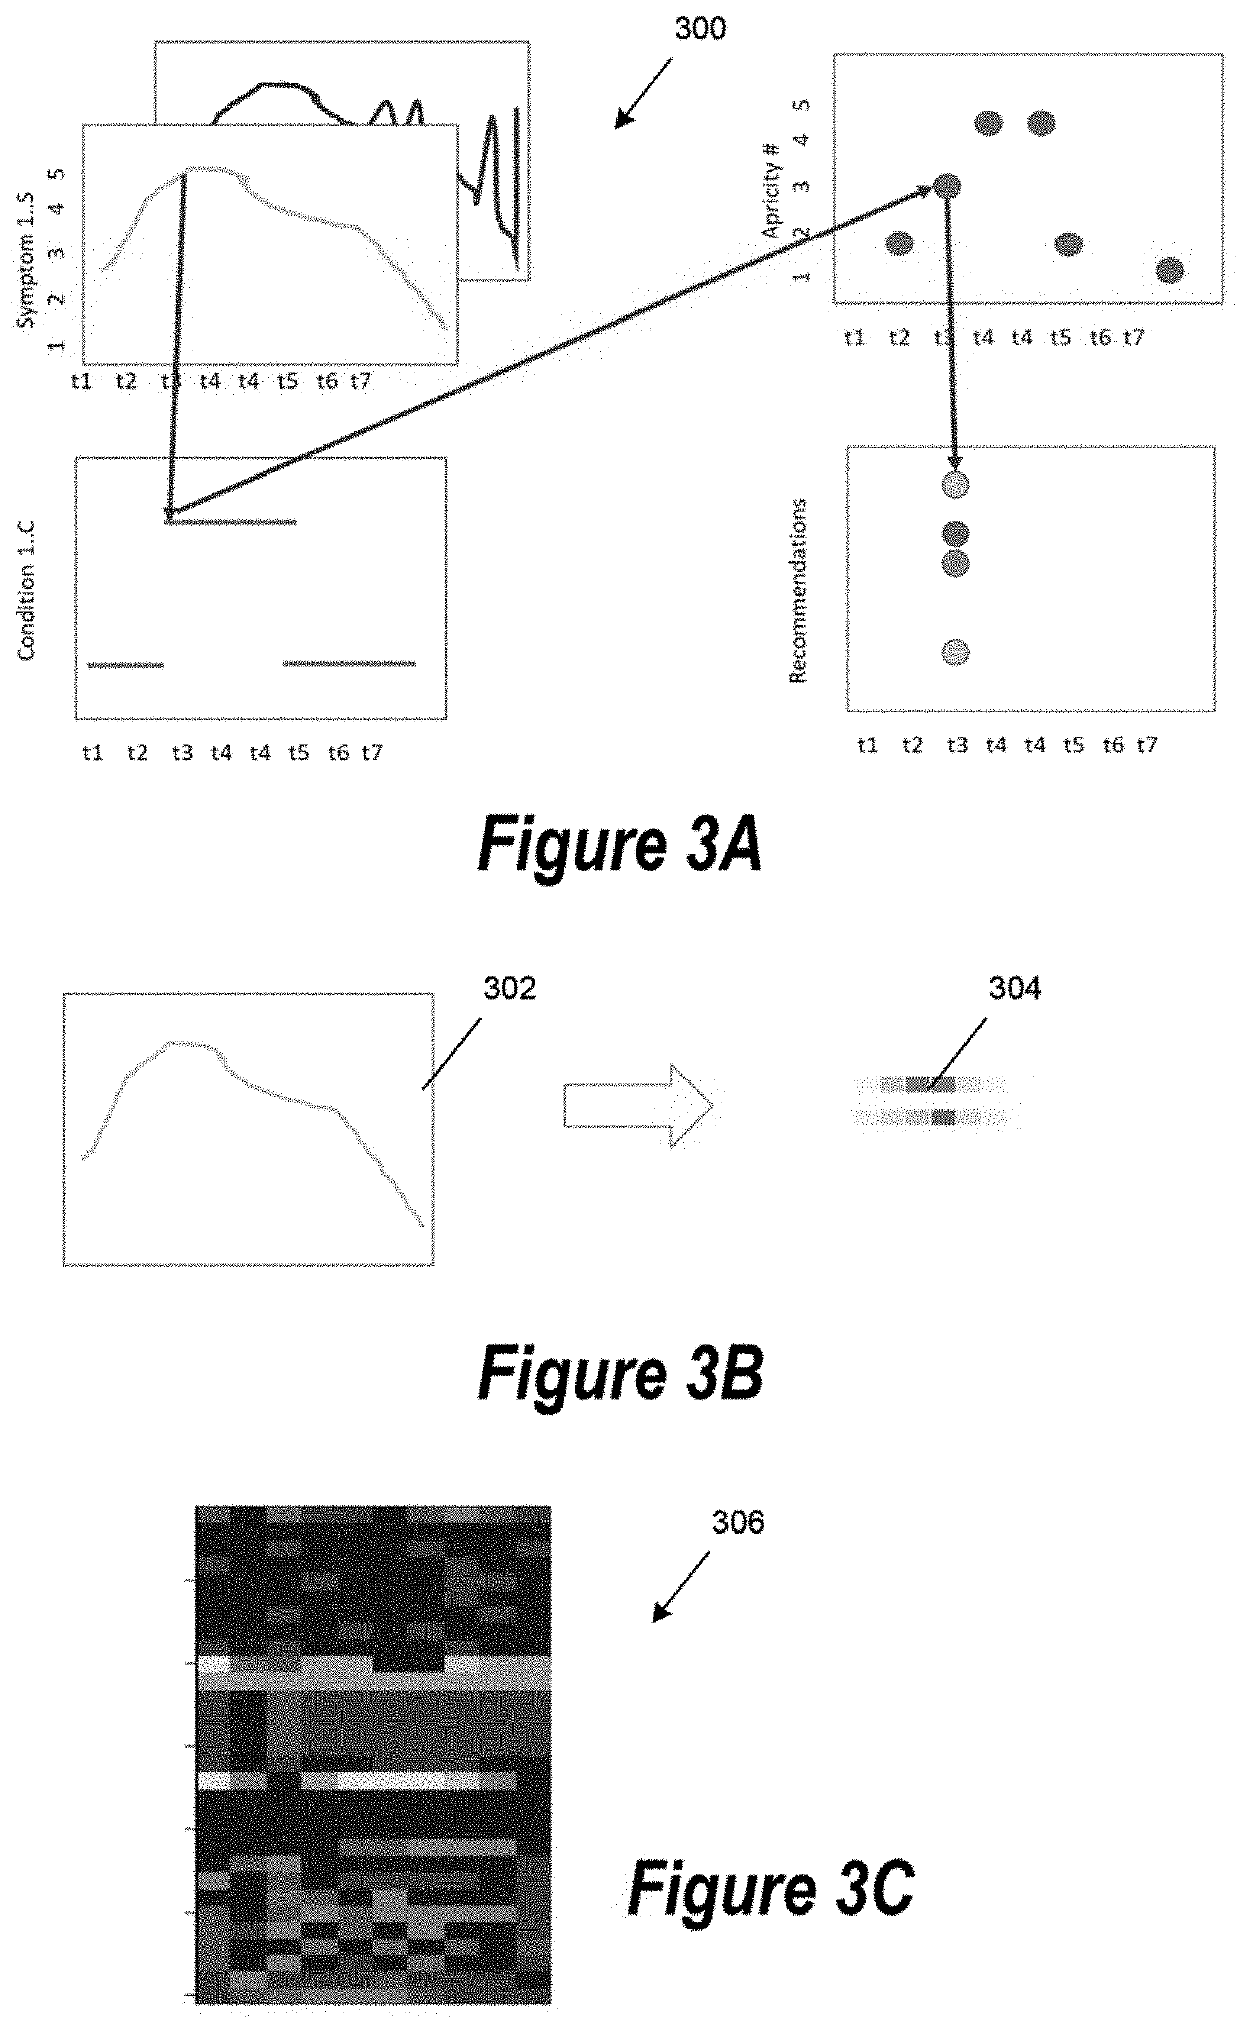 System and Method for Developing Artificial Intelligent Digital Therapeutics with Drug Therapy for Precision and Personalized Care Pathway